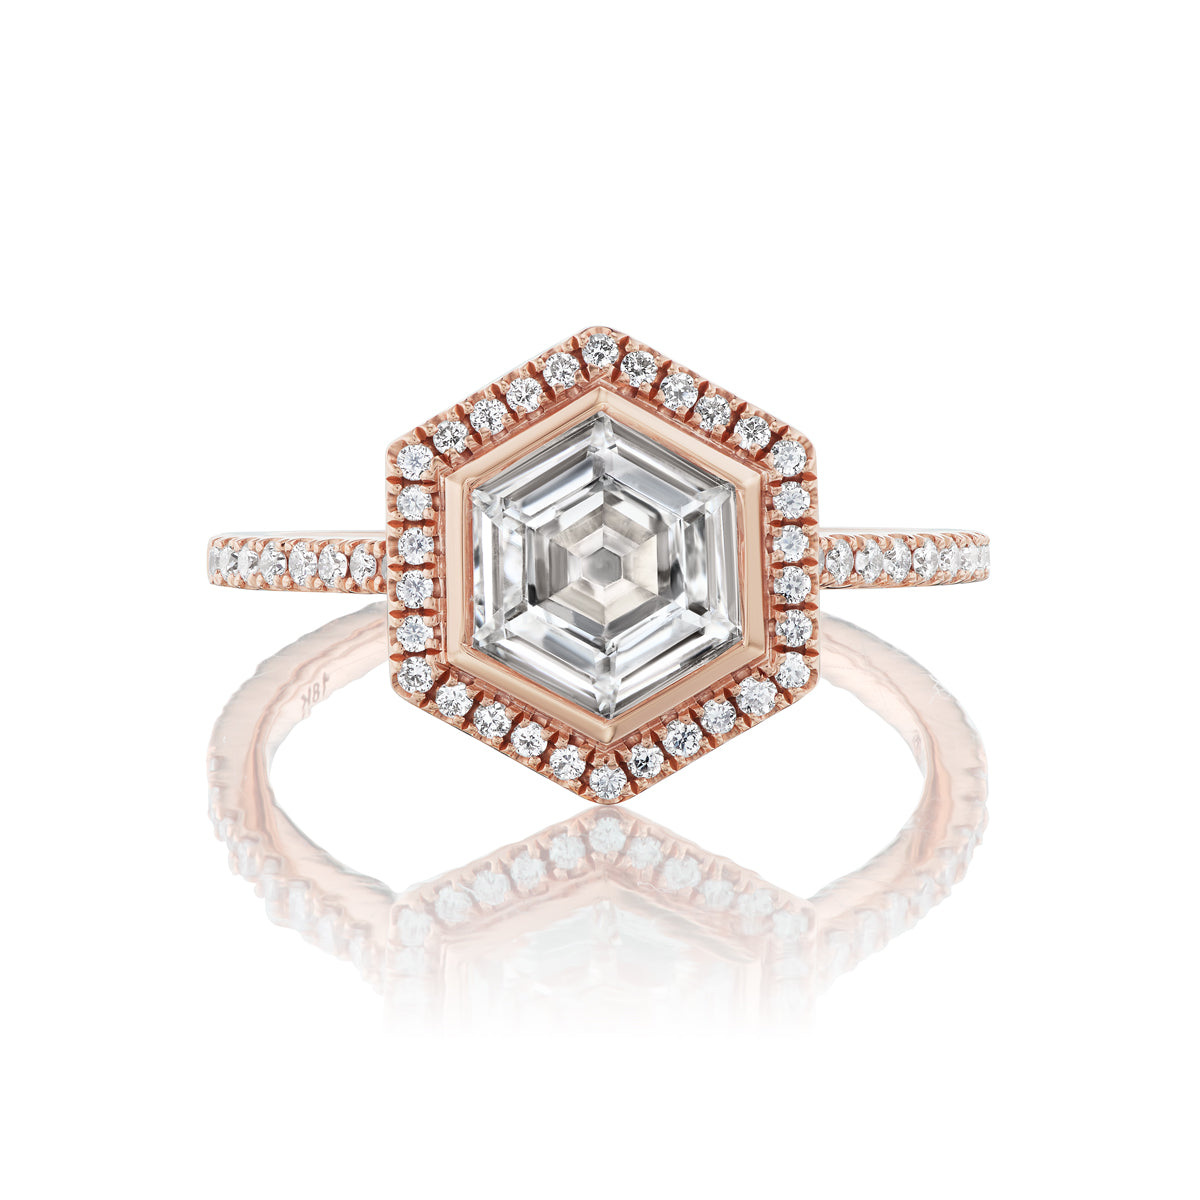 Hexagonal Diamond Engagement Ring with Pavé Bezel and Band